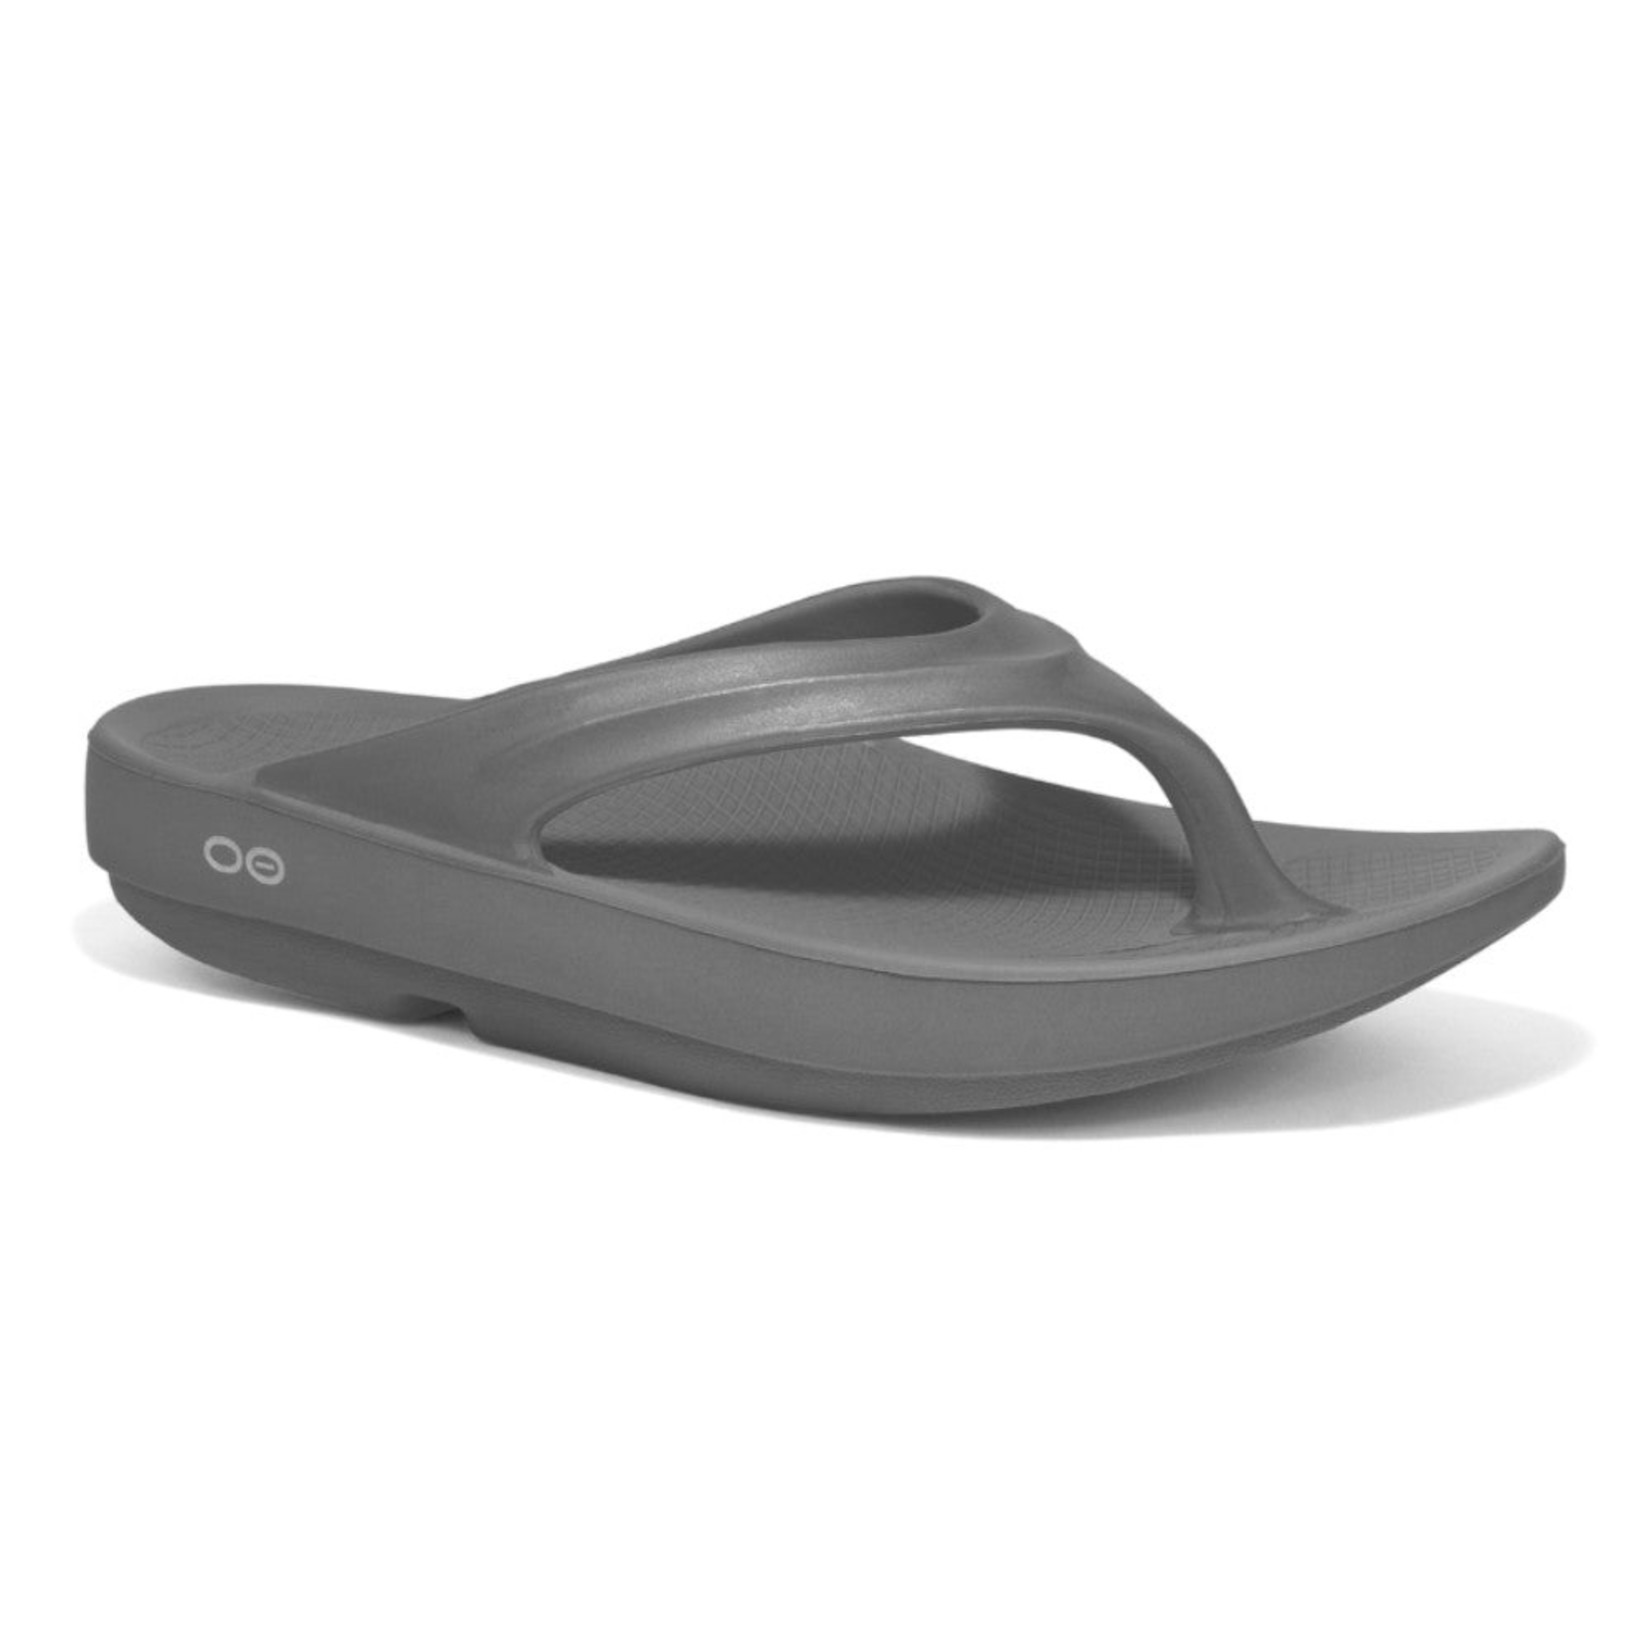 Oofos Oofos 1400 Oolala Thong Women's Sandals